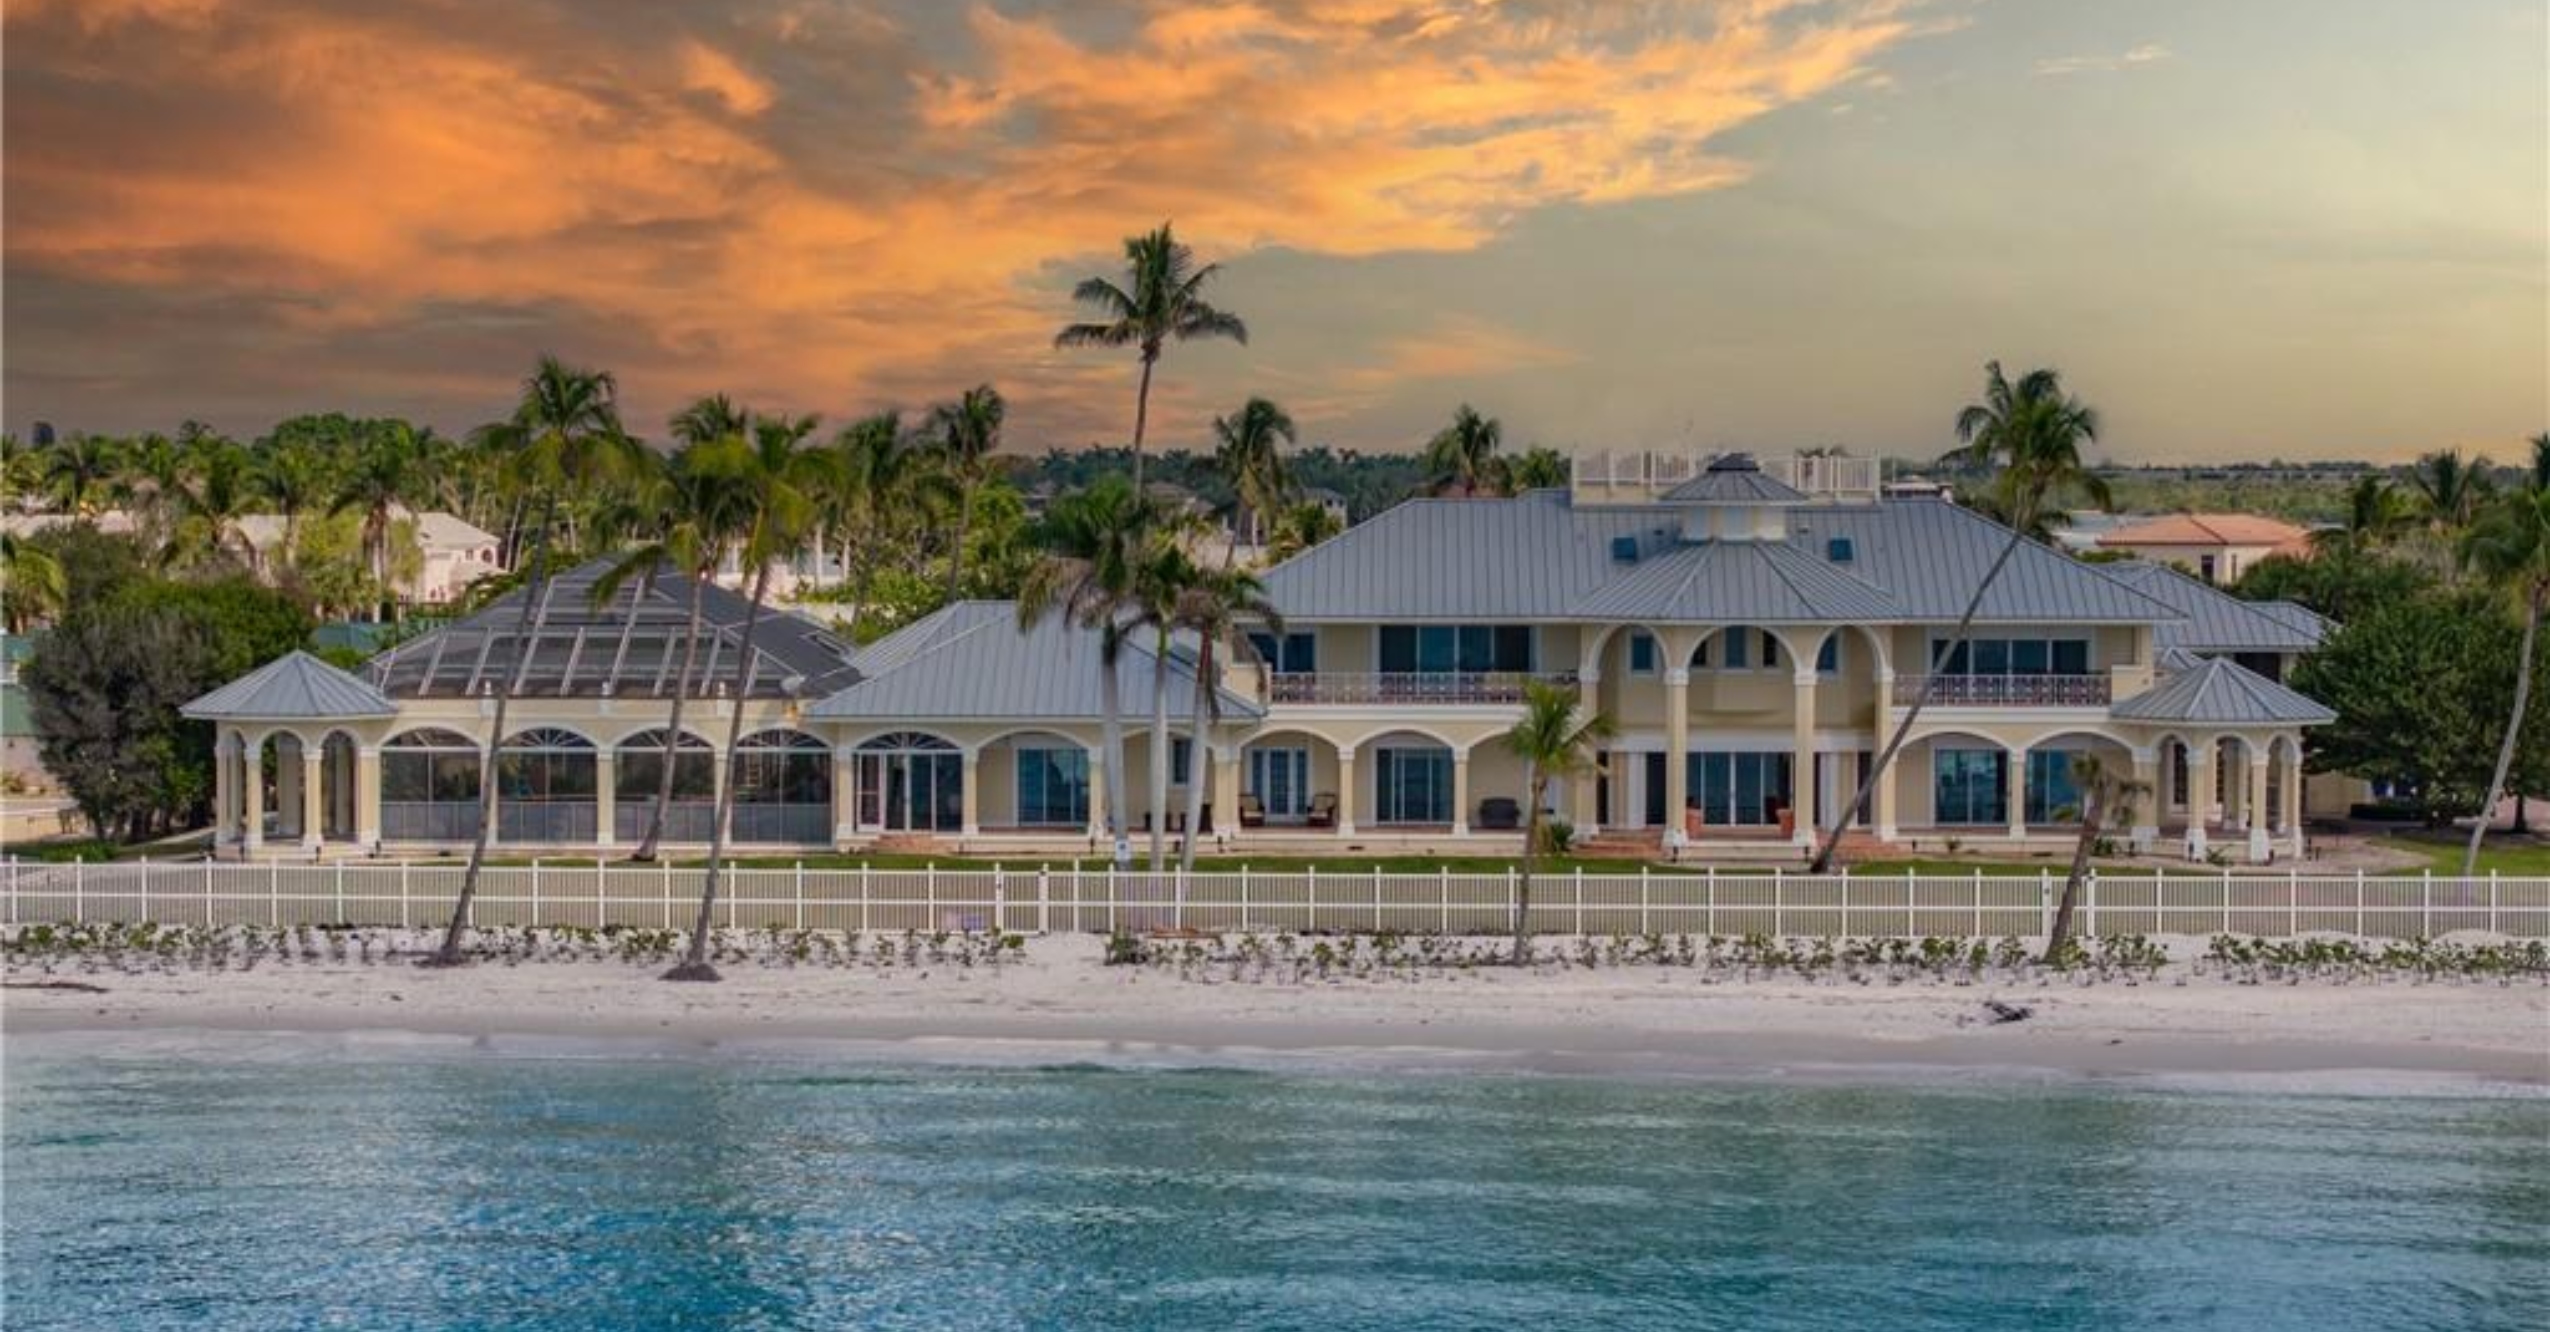 This $295 Million Estate For Sale In Florida May Be America’s Most Expensive Home